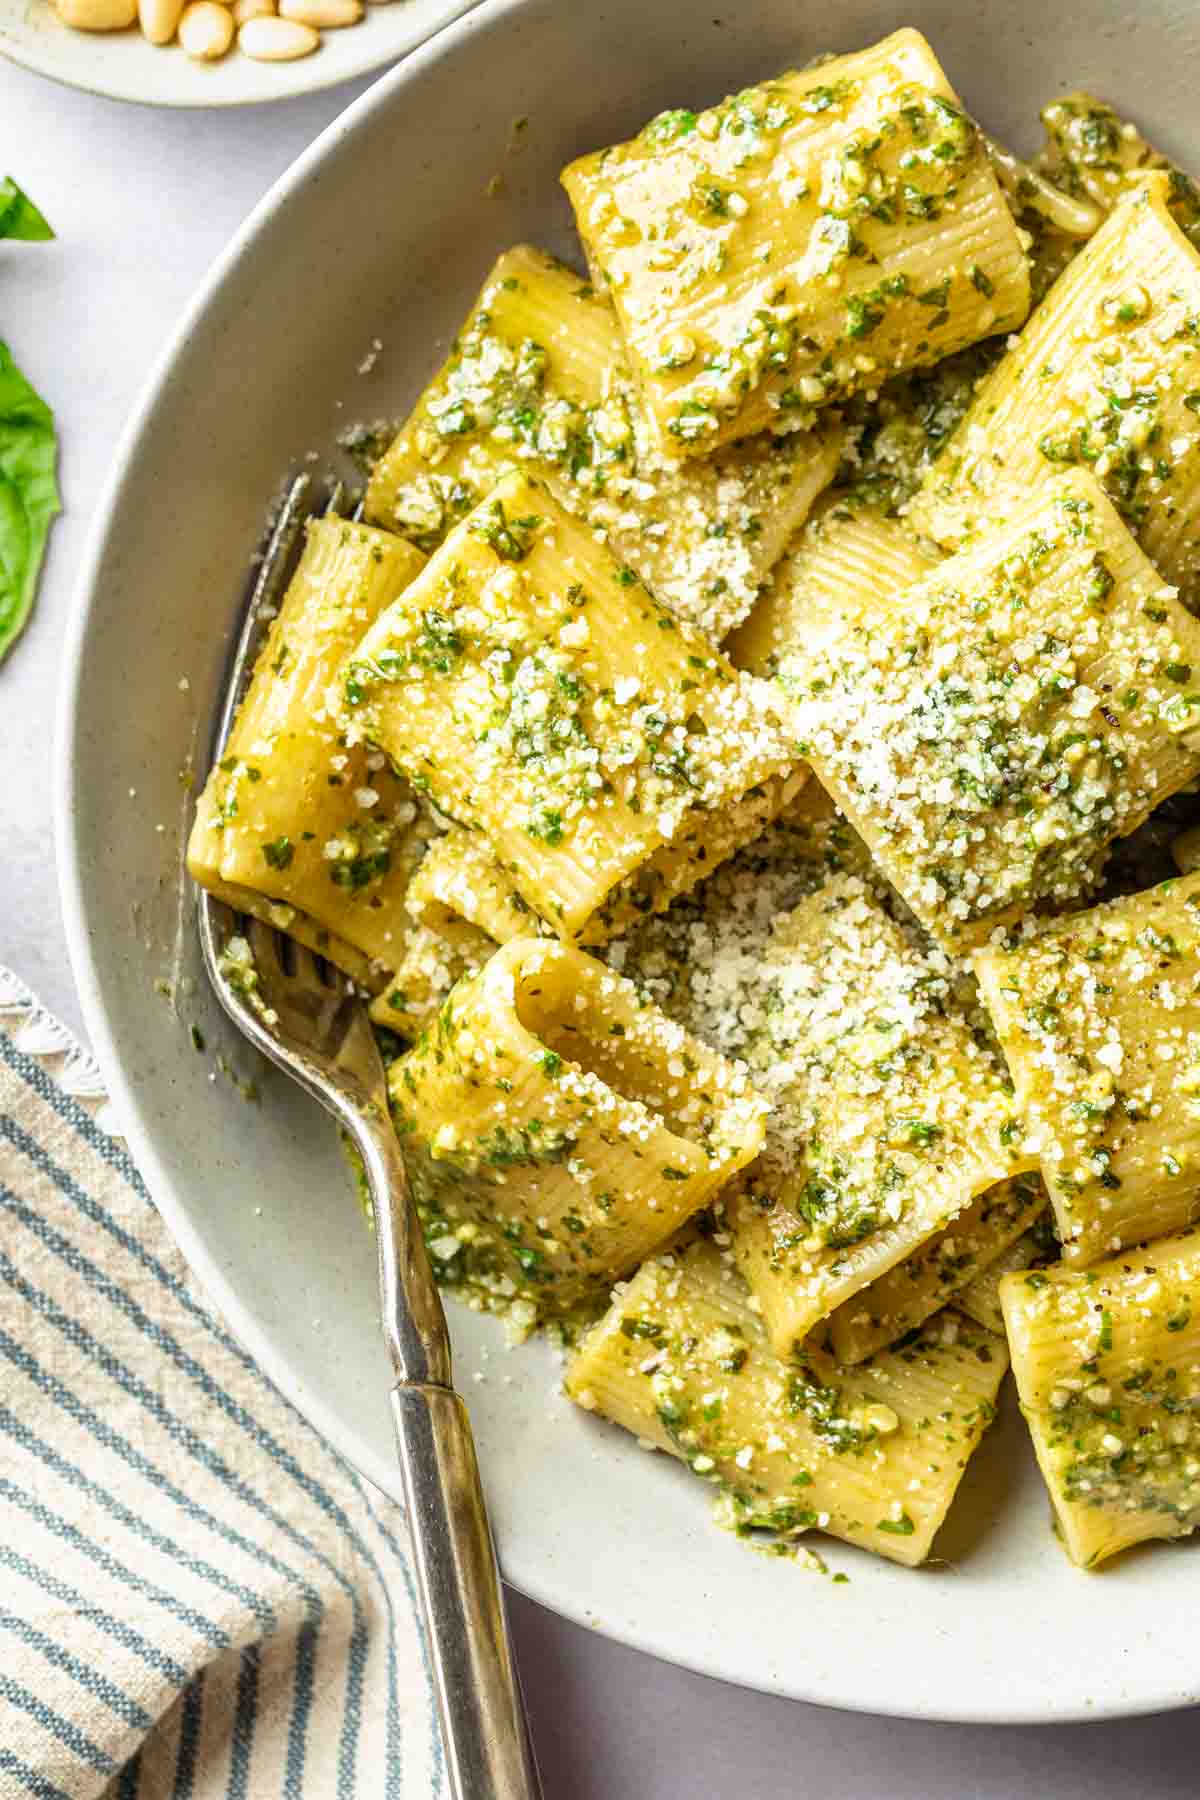 A bowl of rigatoni with pesto sauce in a bowl garnished with grated cheese.